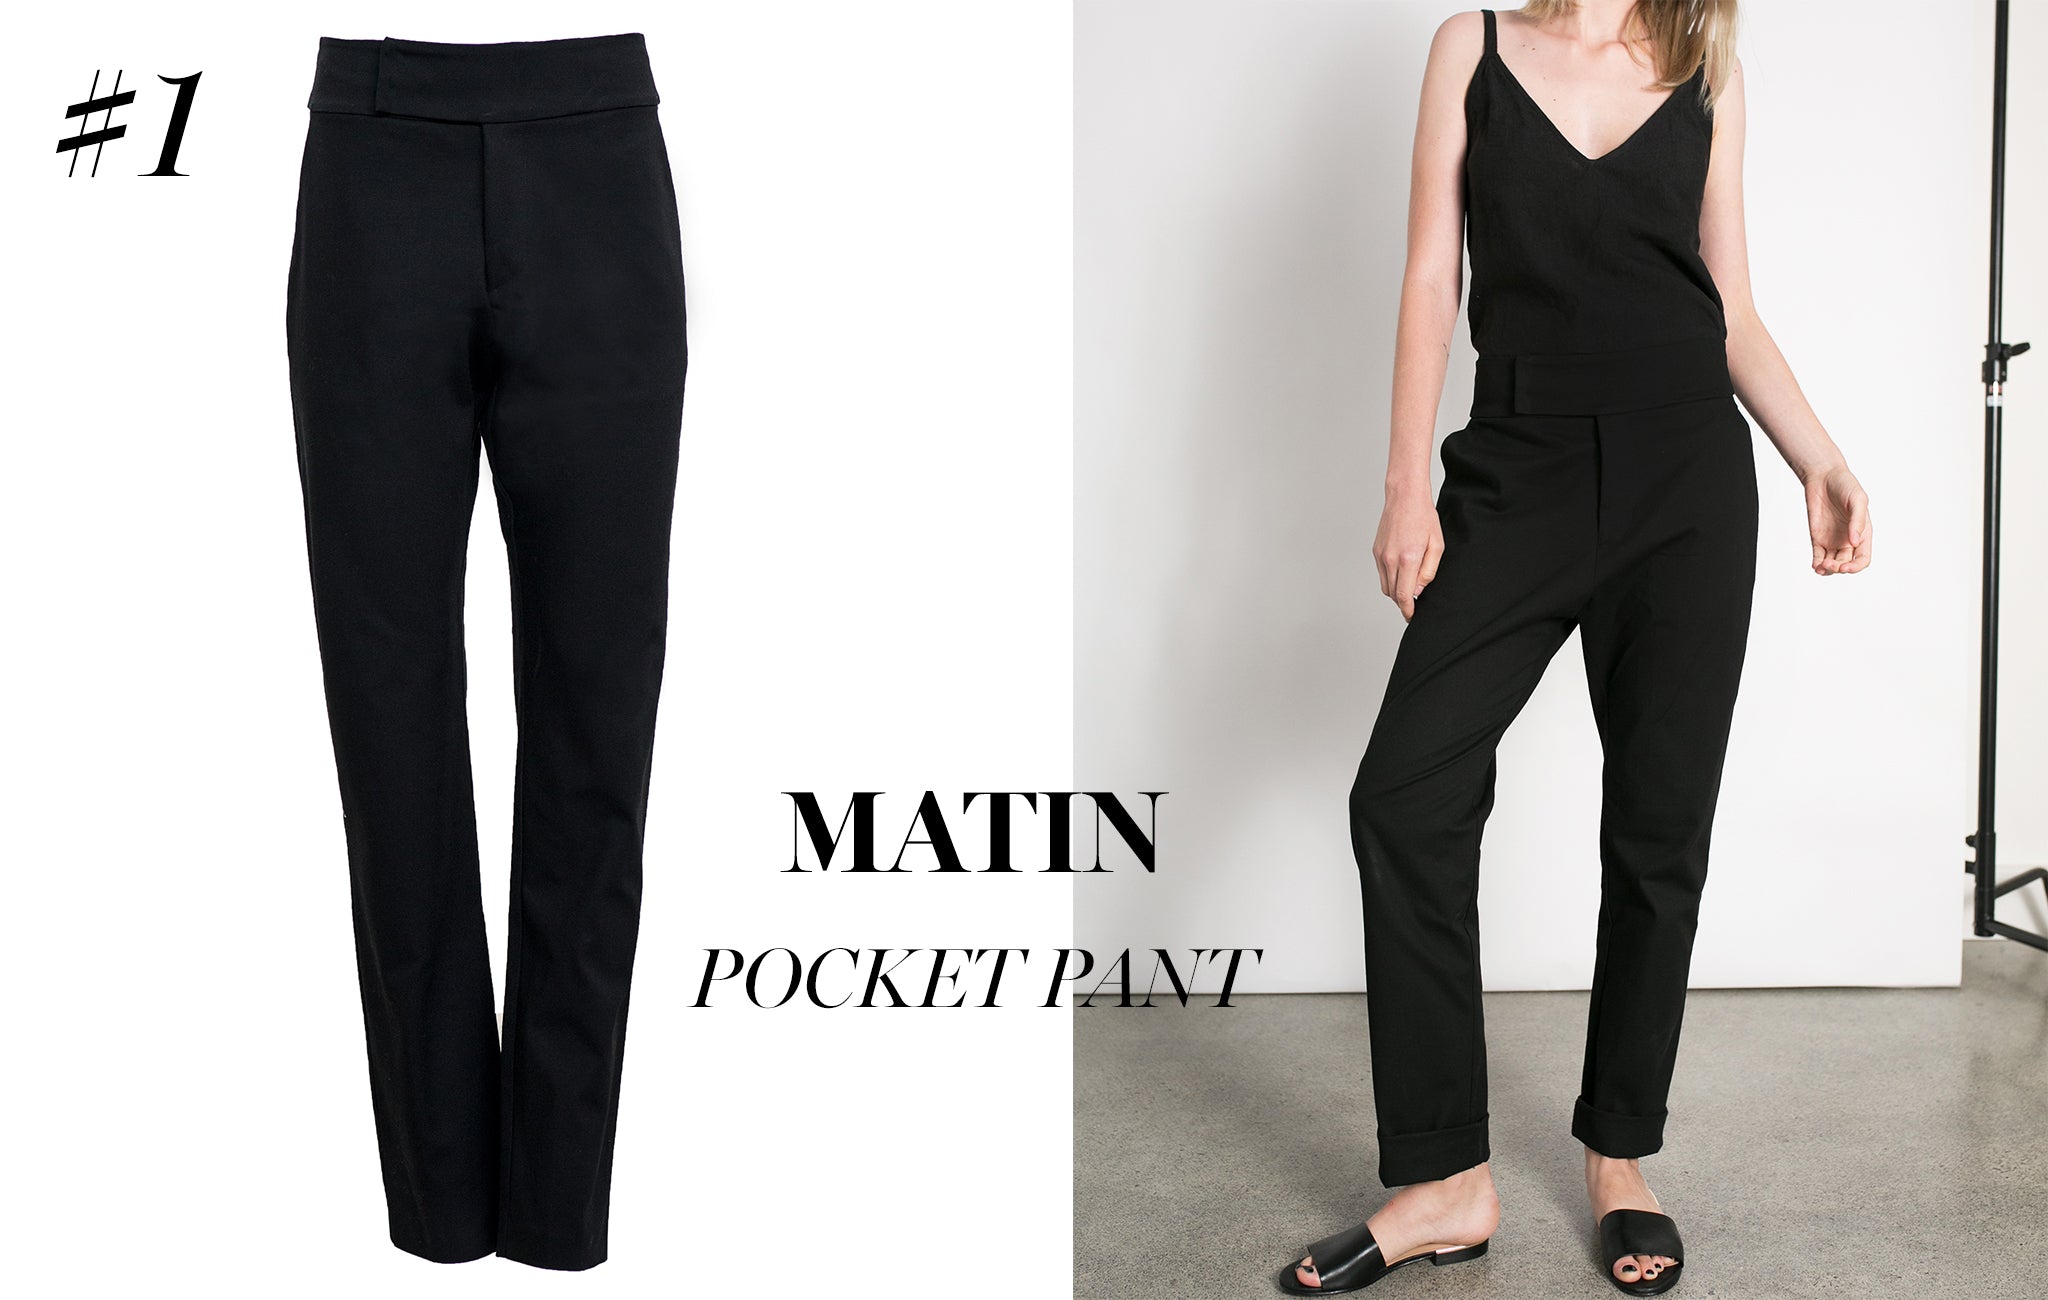 Matin Pocket Pant from The UNDONE